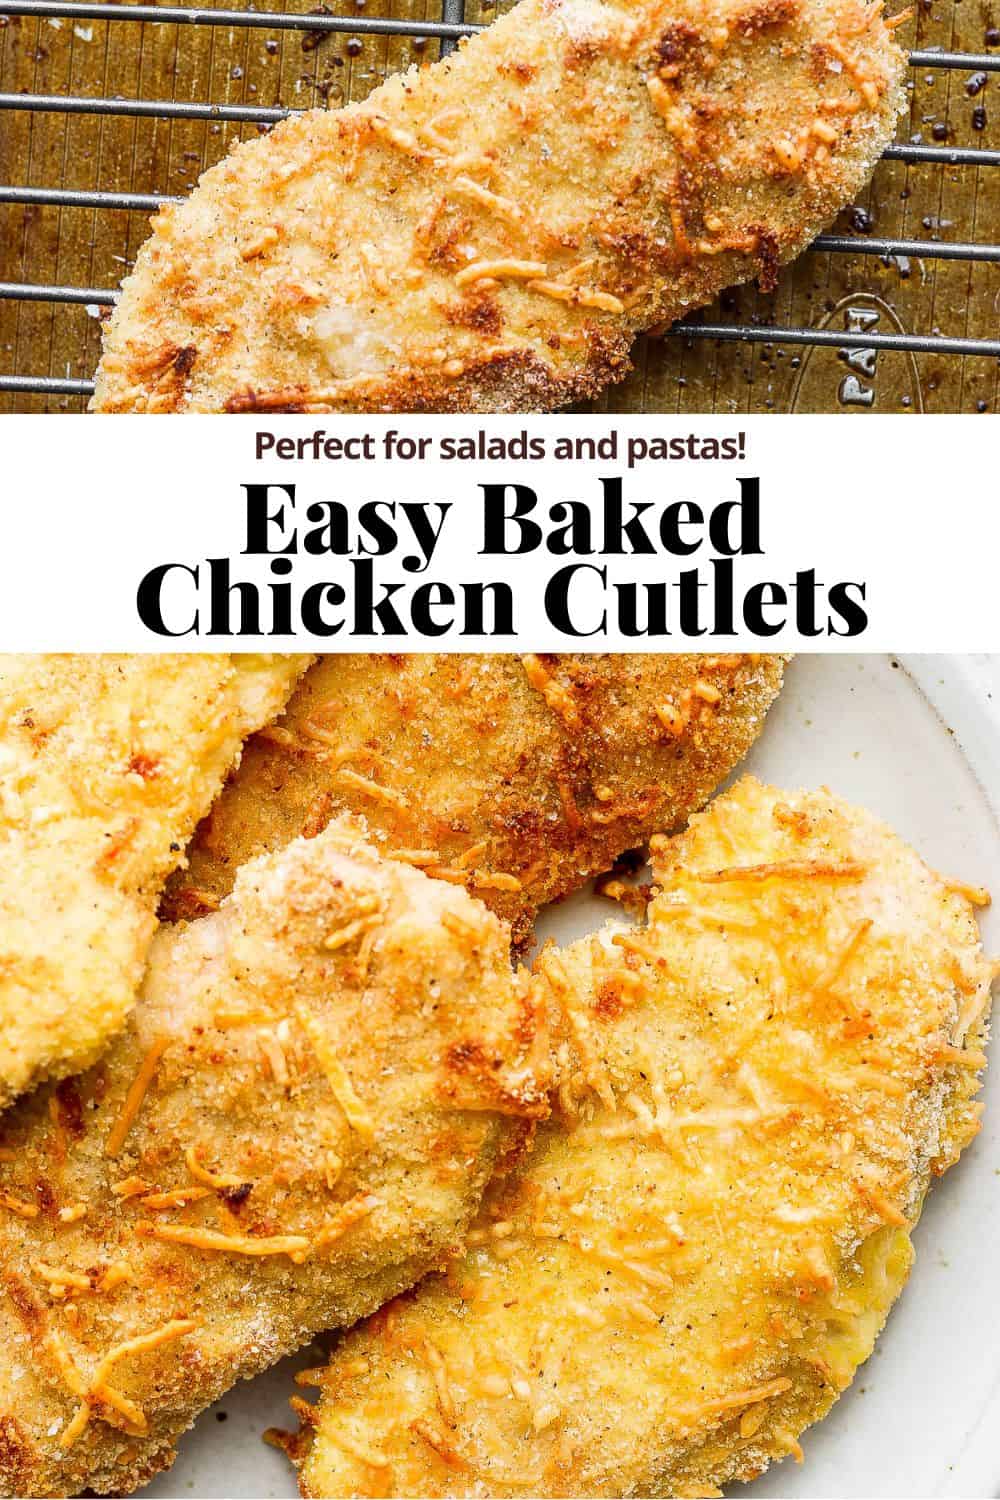 Pinterest image for baked chicken cutlets.